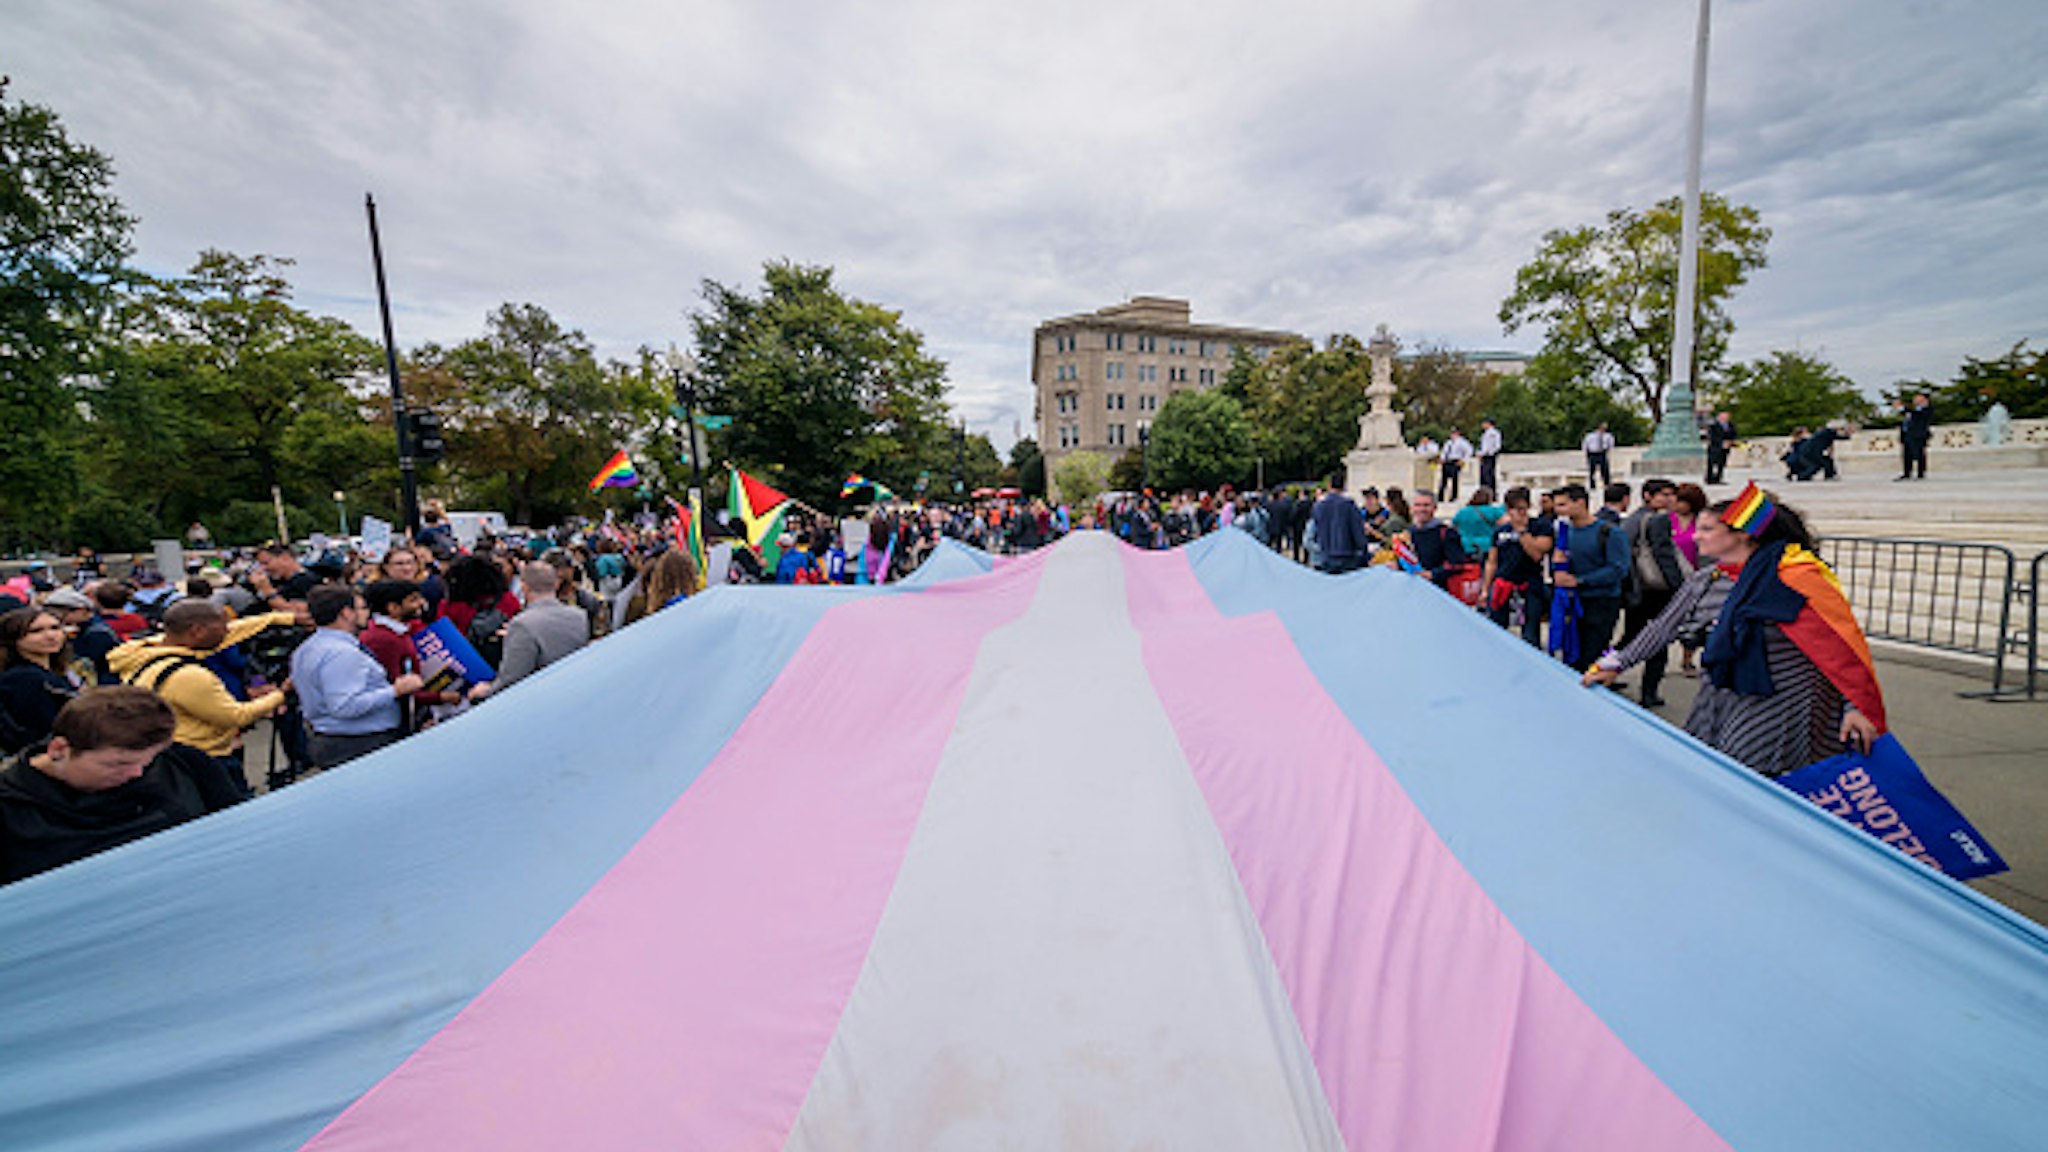 WASHINGTON DC, UNITED STATES - 2019/10/08: A giant Trans Flag unfurled outside the Supreme Court. 133 protesters were arrested blocking the street across the Supreme Court in an act of non violent civil disobedience, as hundreds of LGBTQ+ advocates convened in Washington, DC for a national day of action as a community response to the landmark Supreme Court hearings that could legalize workplace discrimination, primarily against LGBTQ+ people, on the basis of sexual orientation, gender identity, and gender presentation.